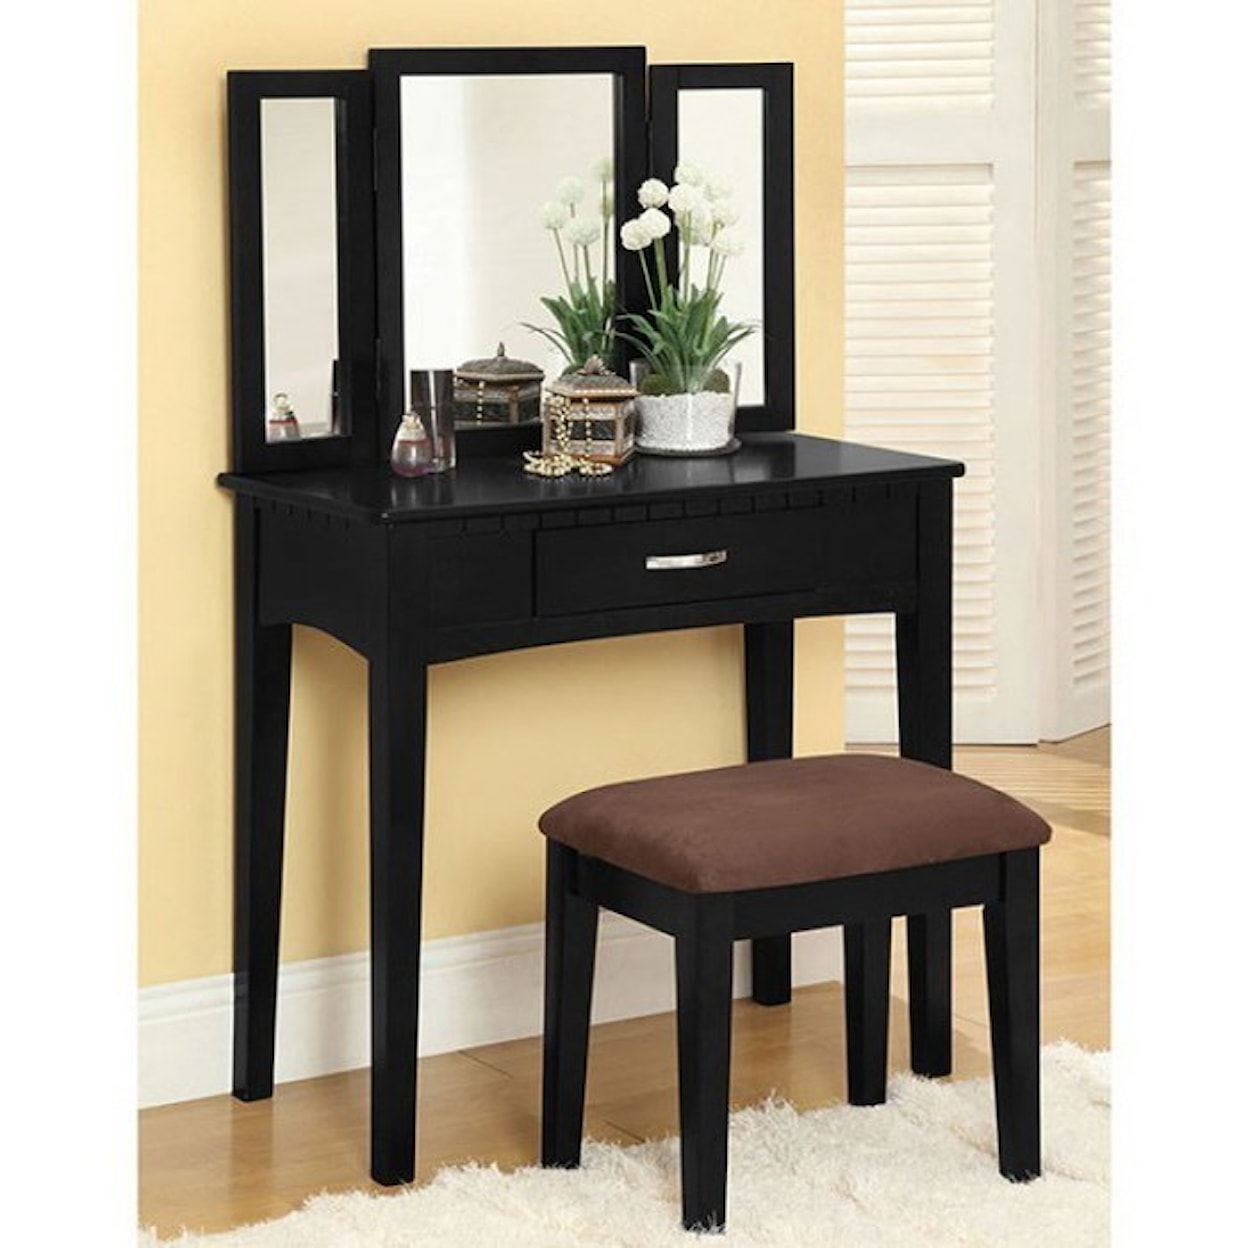 Furniture of America Potterville Vanity Table with Stool